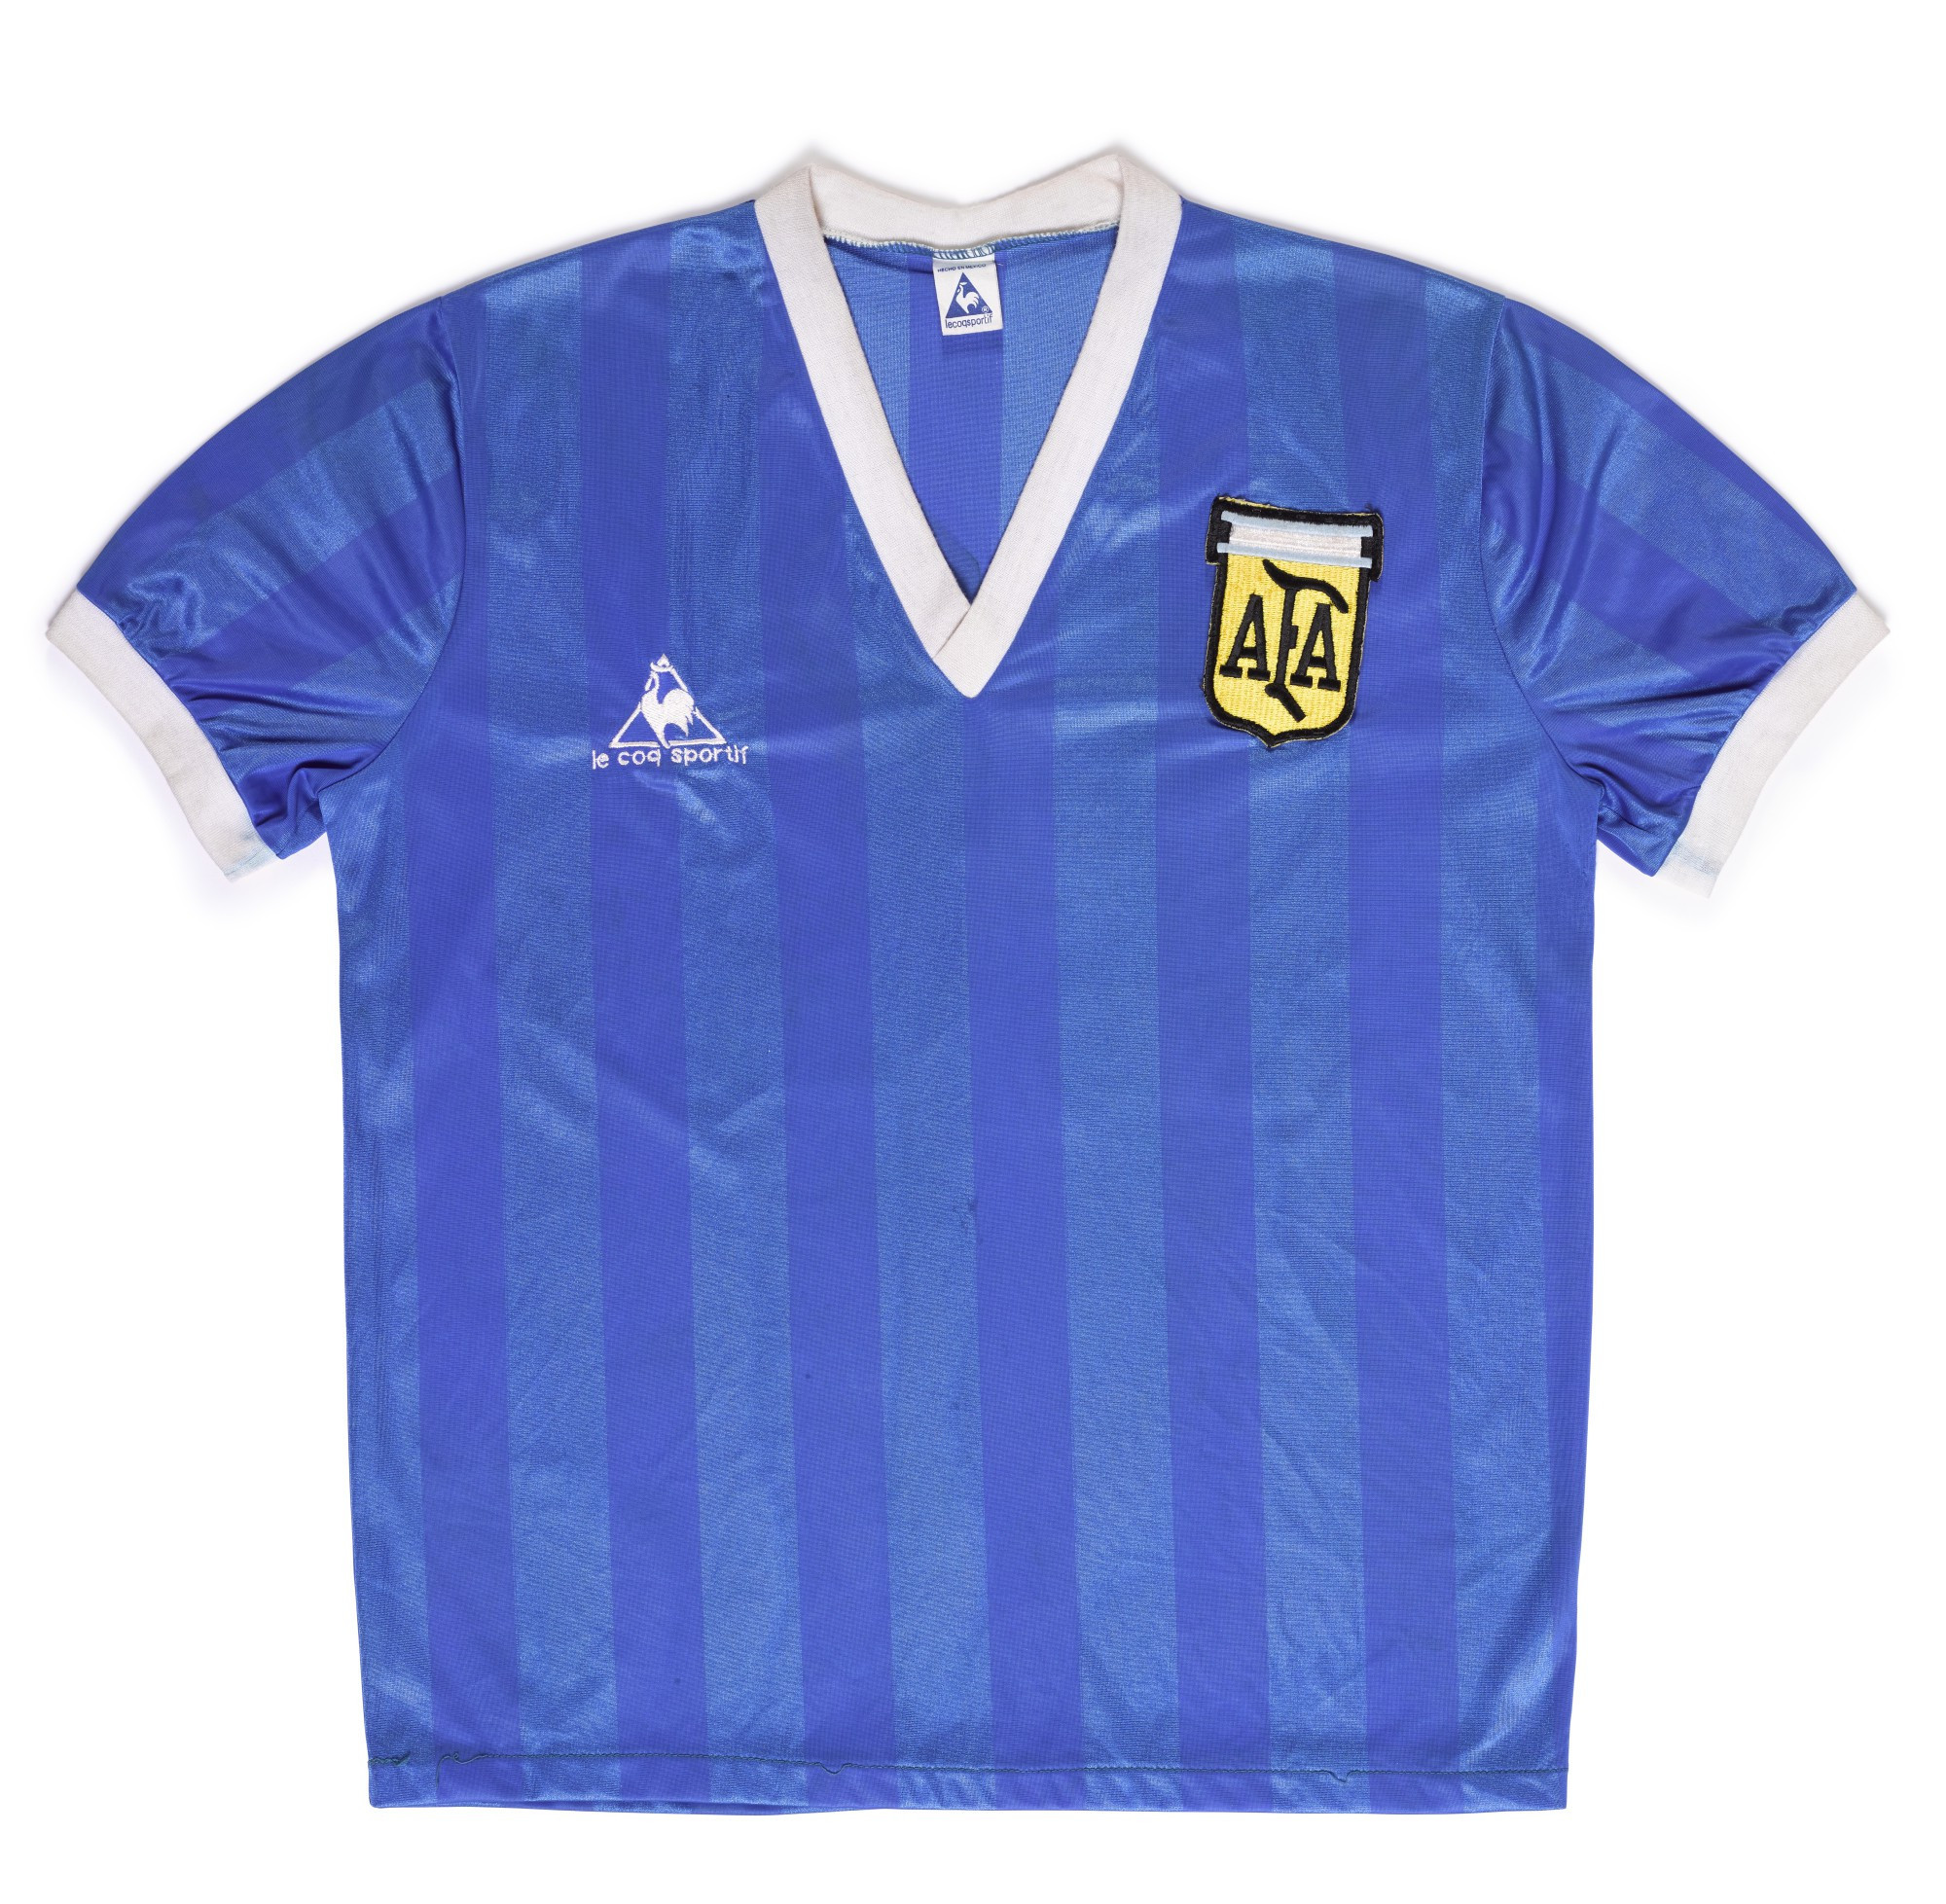 It has been speculated that Diego Maradona's shirt could set a new record for the most expensive item of sports memorabilia ever sold at auction ©Sotheby's